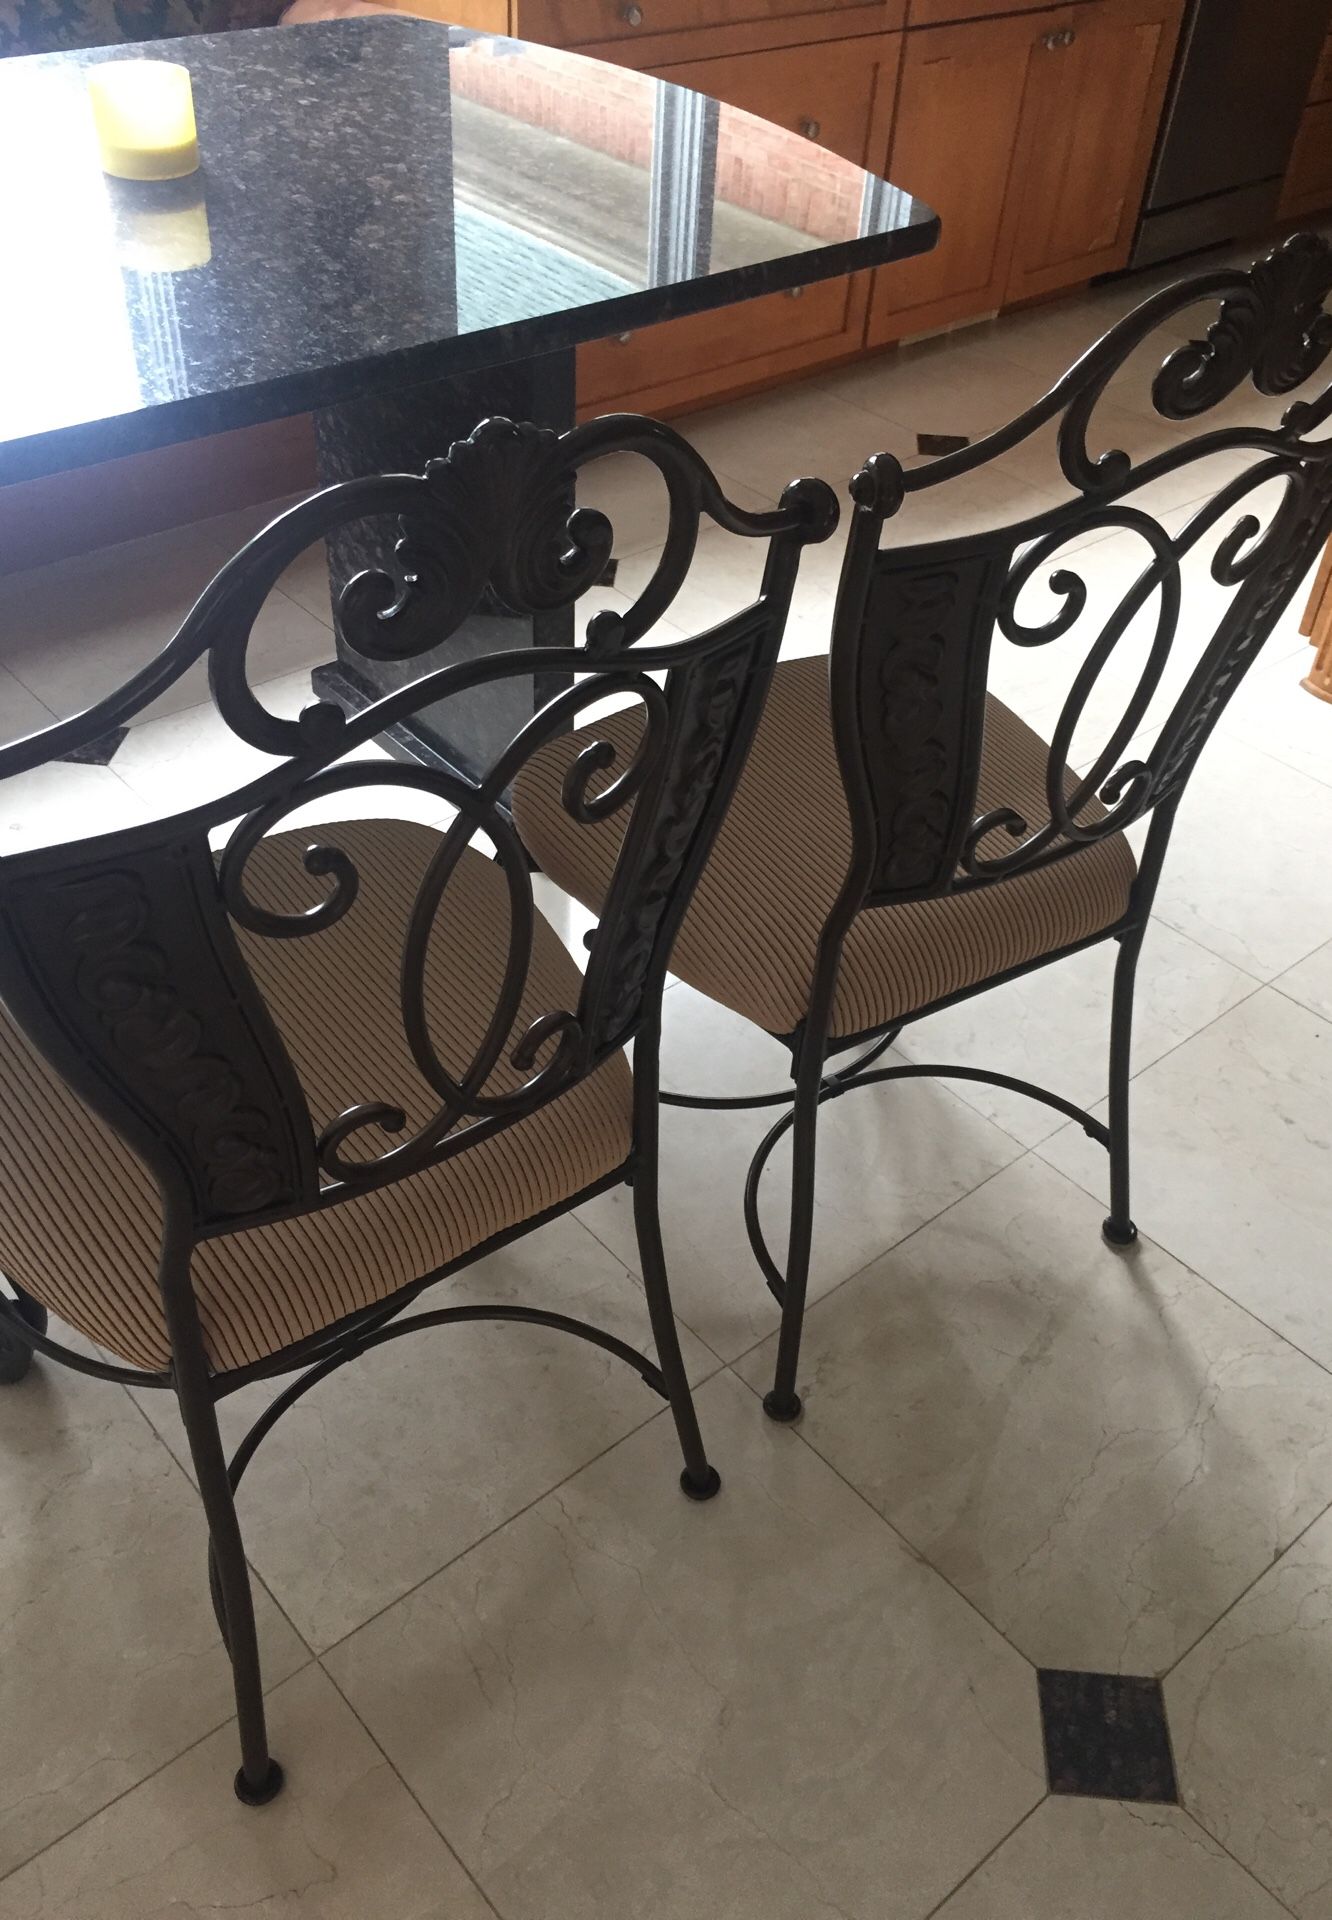 Two kitchen wrought iron chairs. Normal used wear